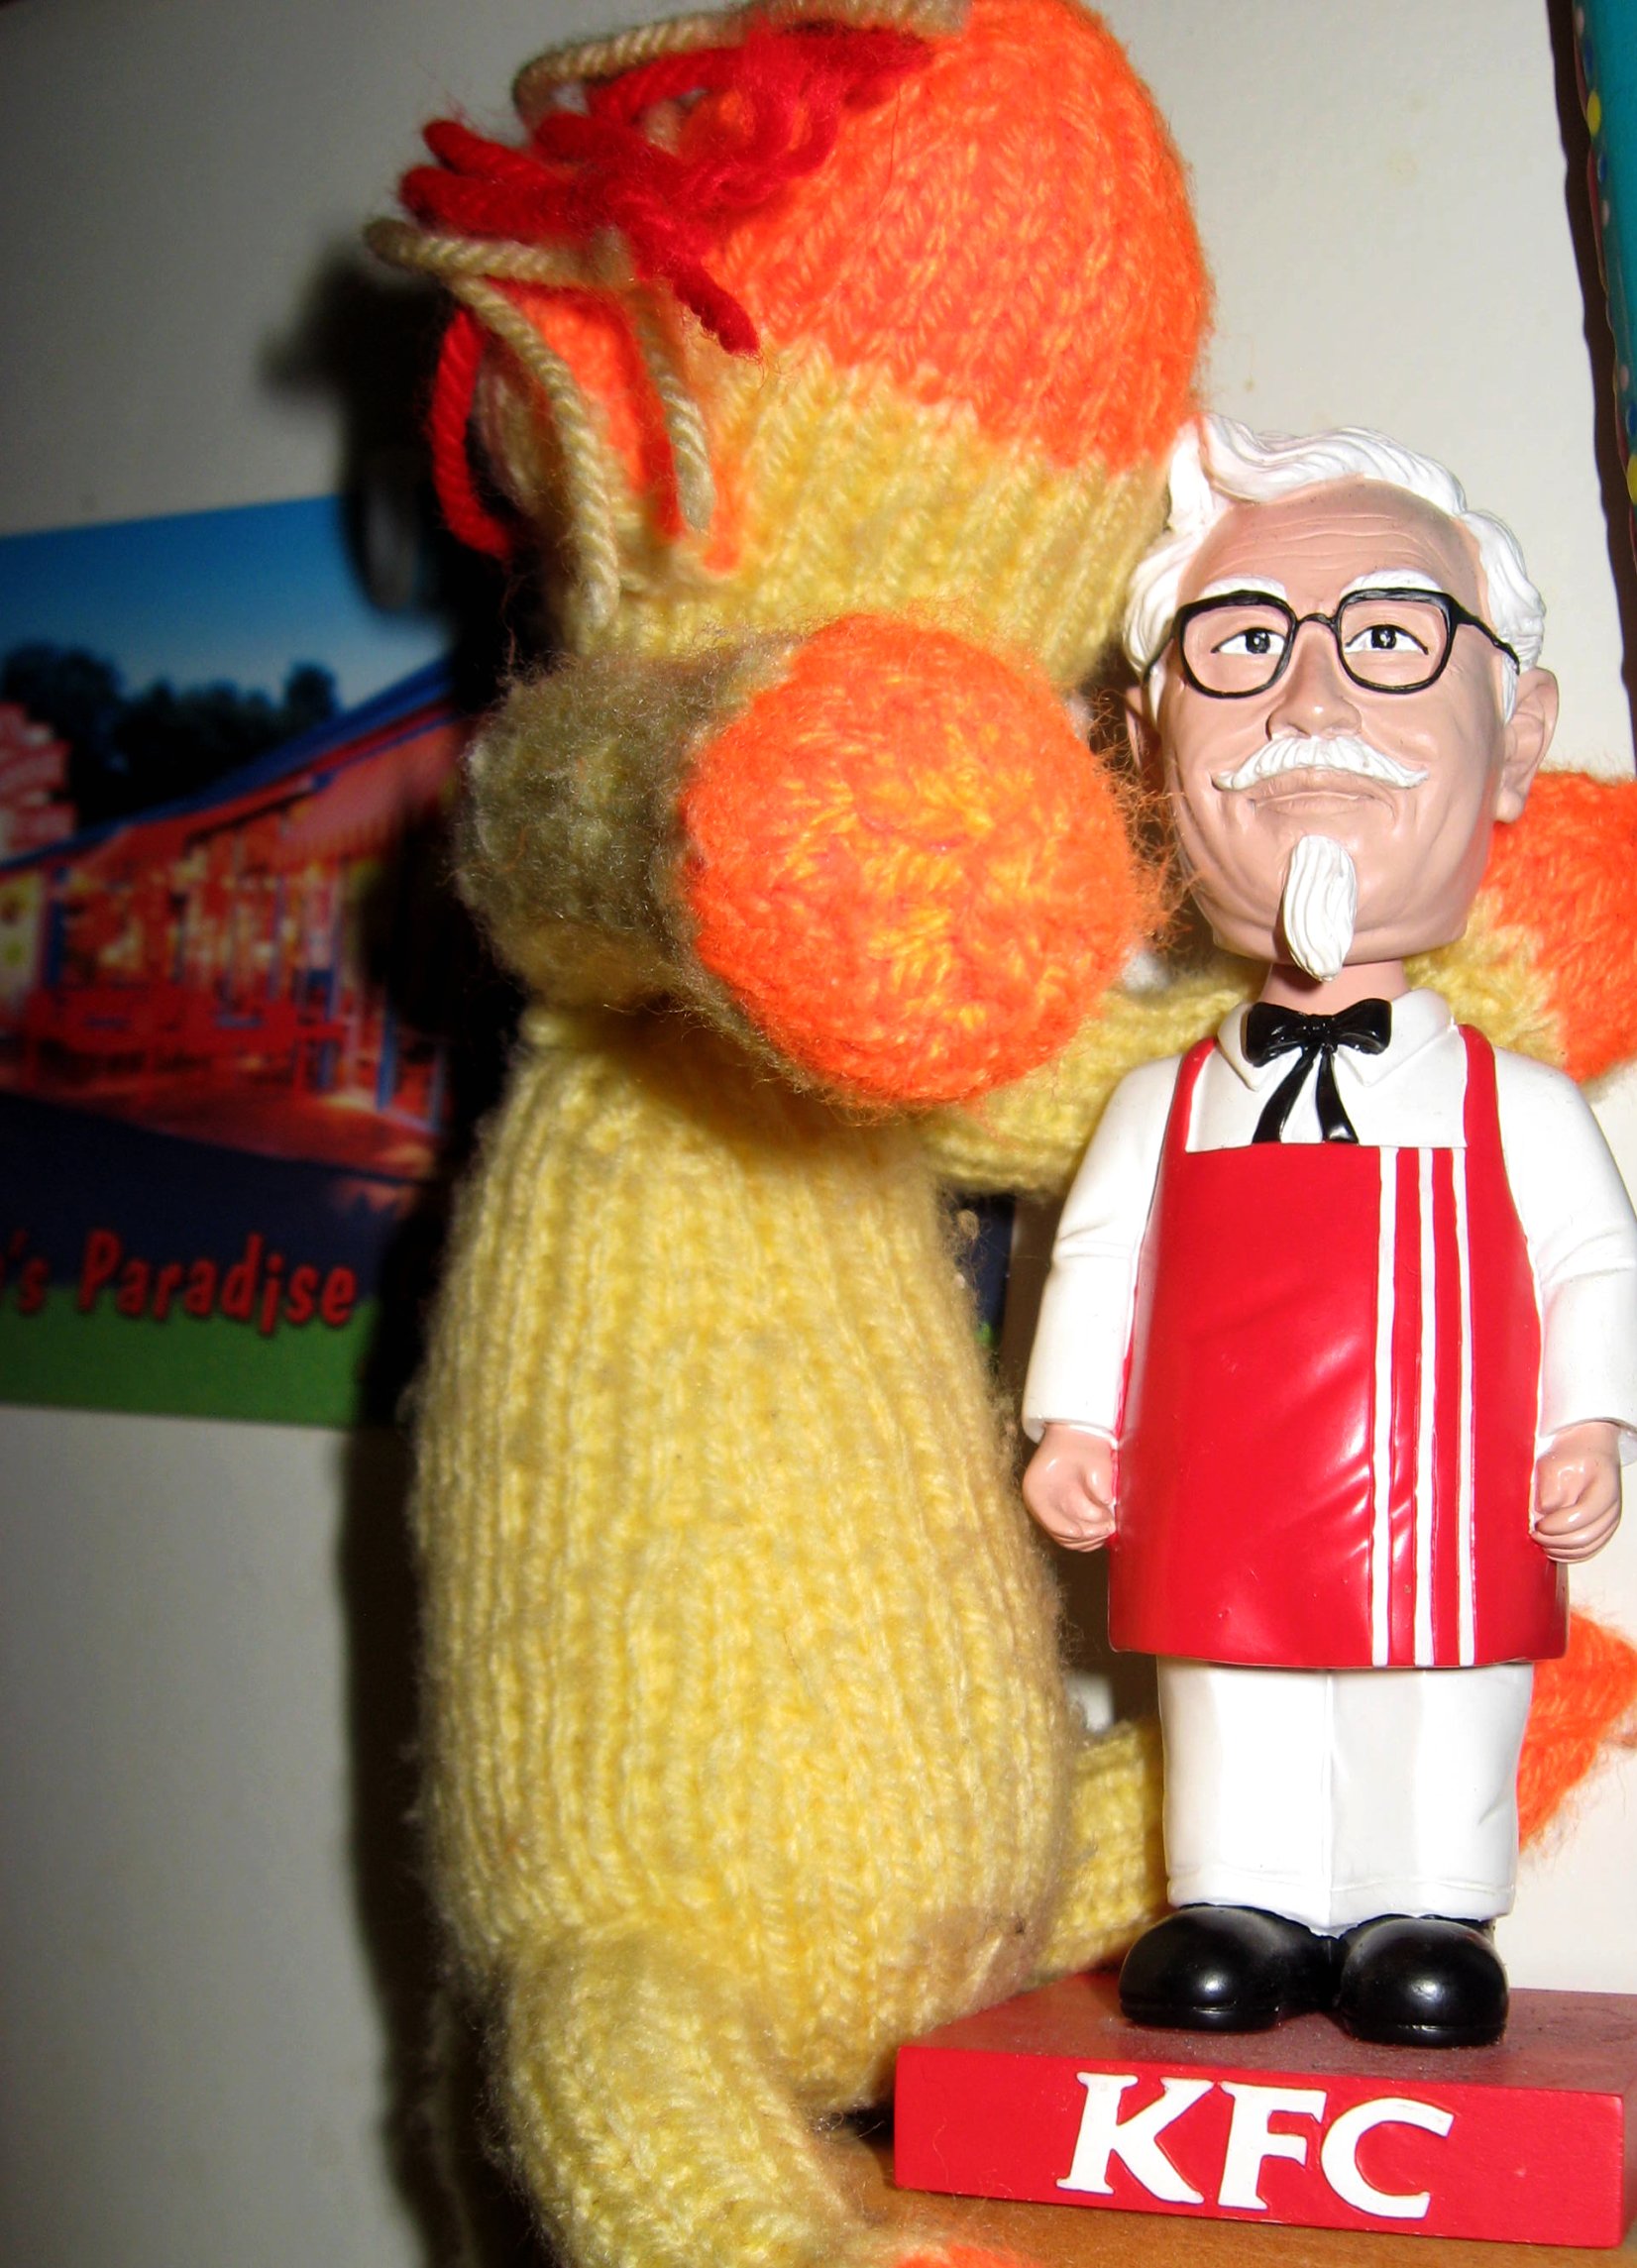 Chatting with Colonel Sanders